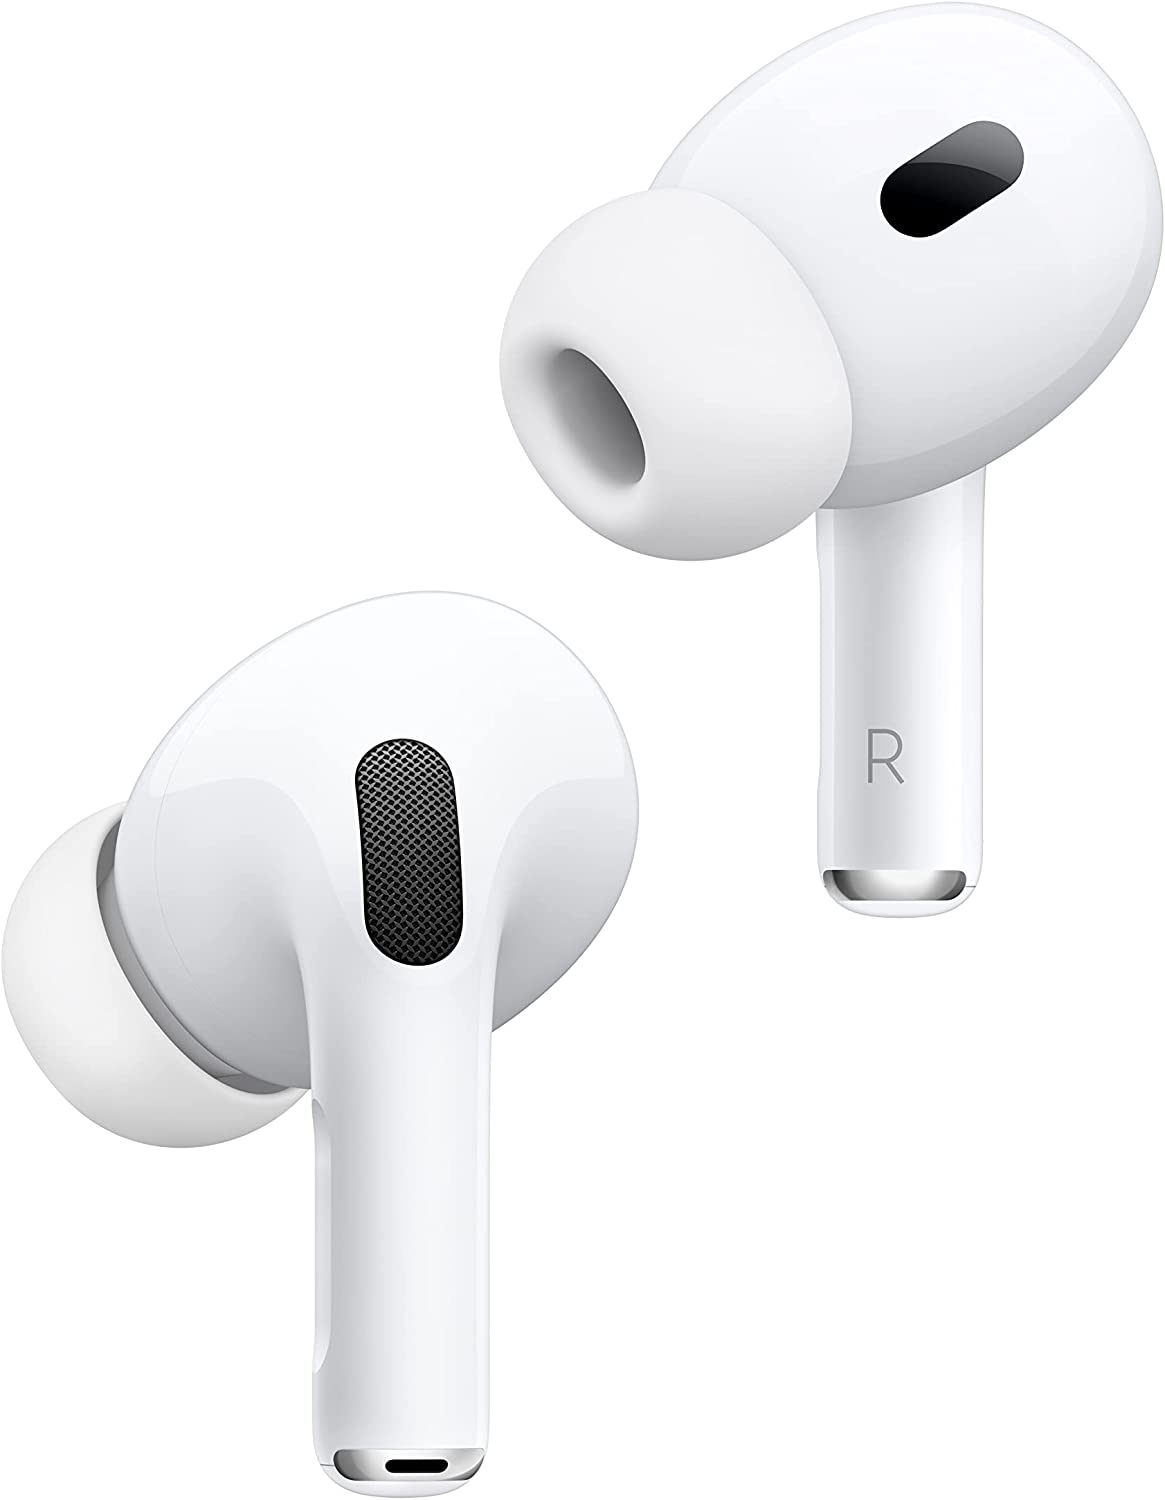 OUTLET 包装 即日発送 代引無料 ☆本日限定☆Apple AirPods Pro 第2